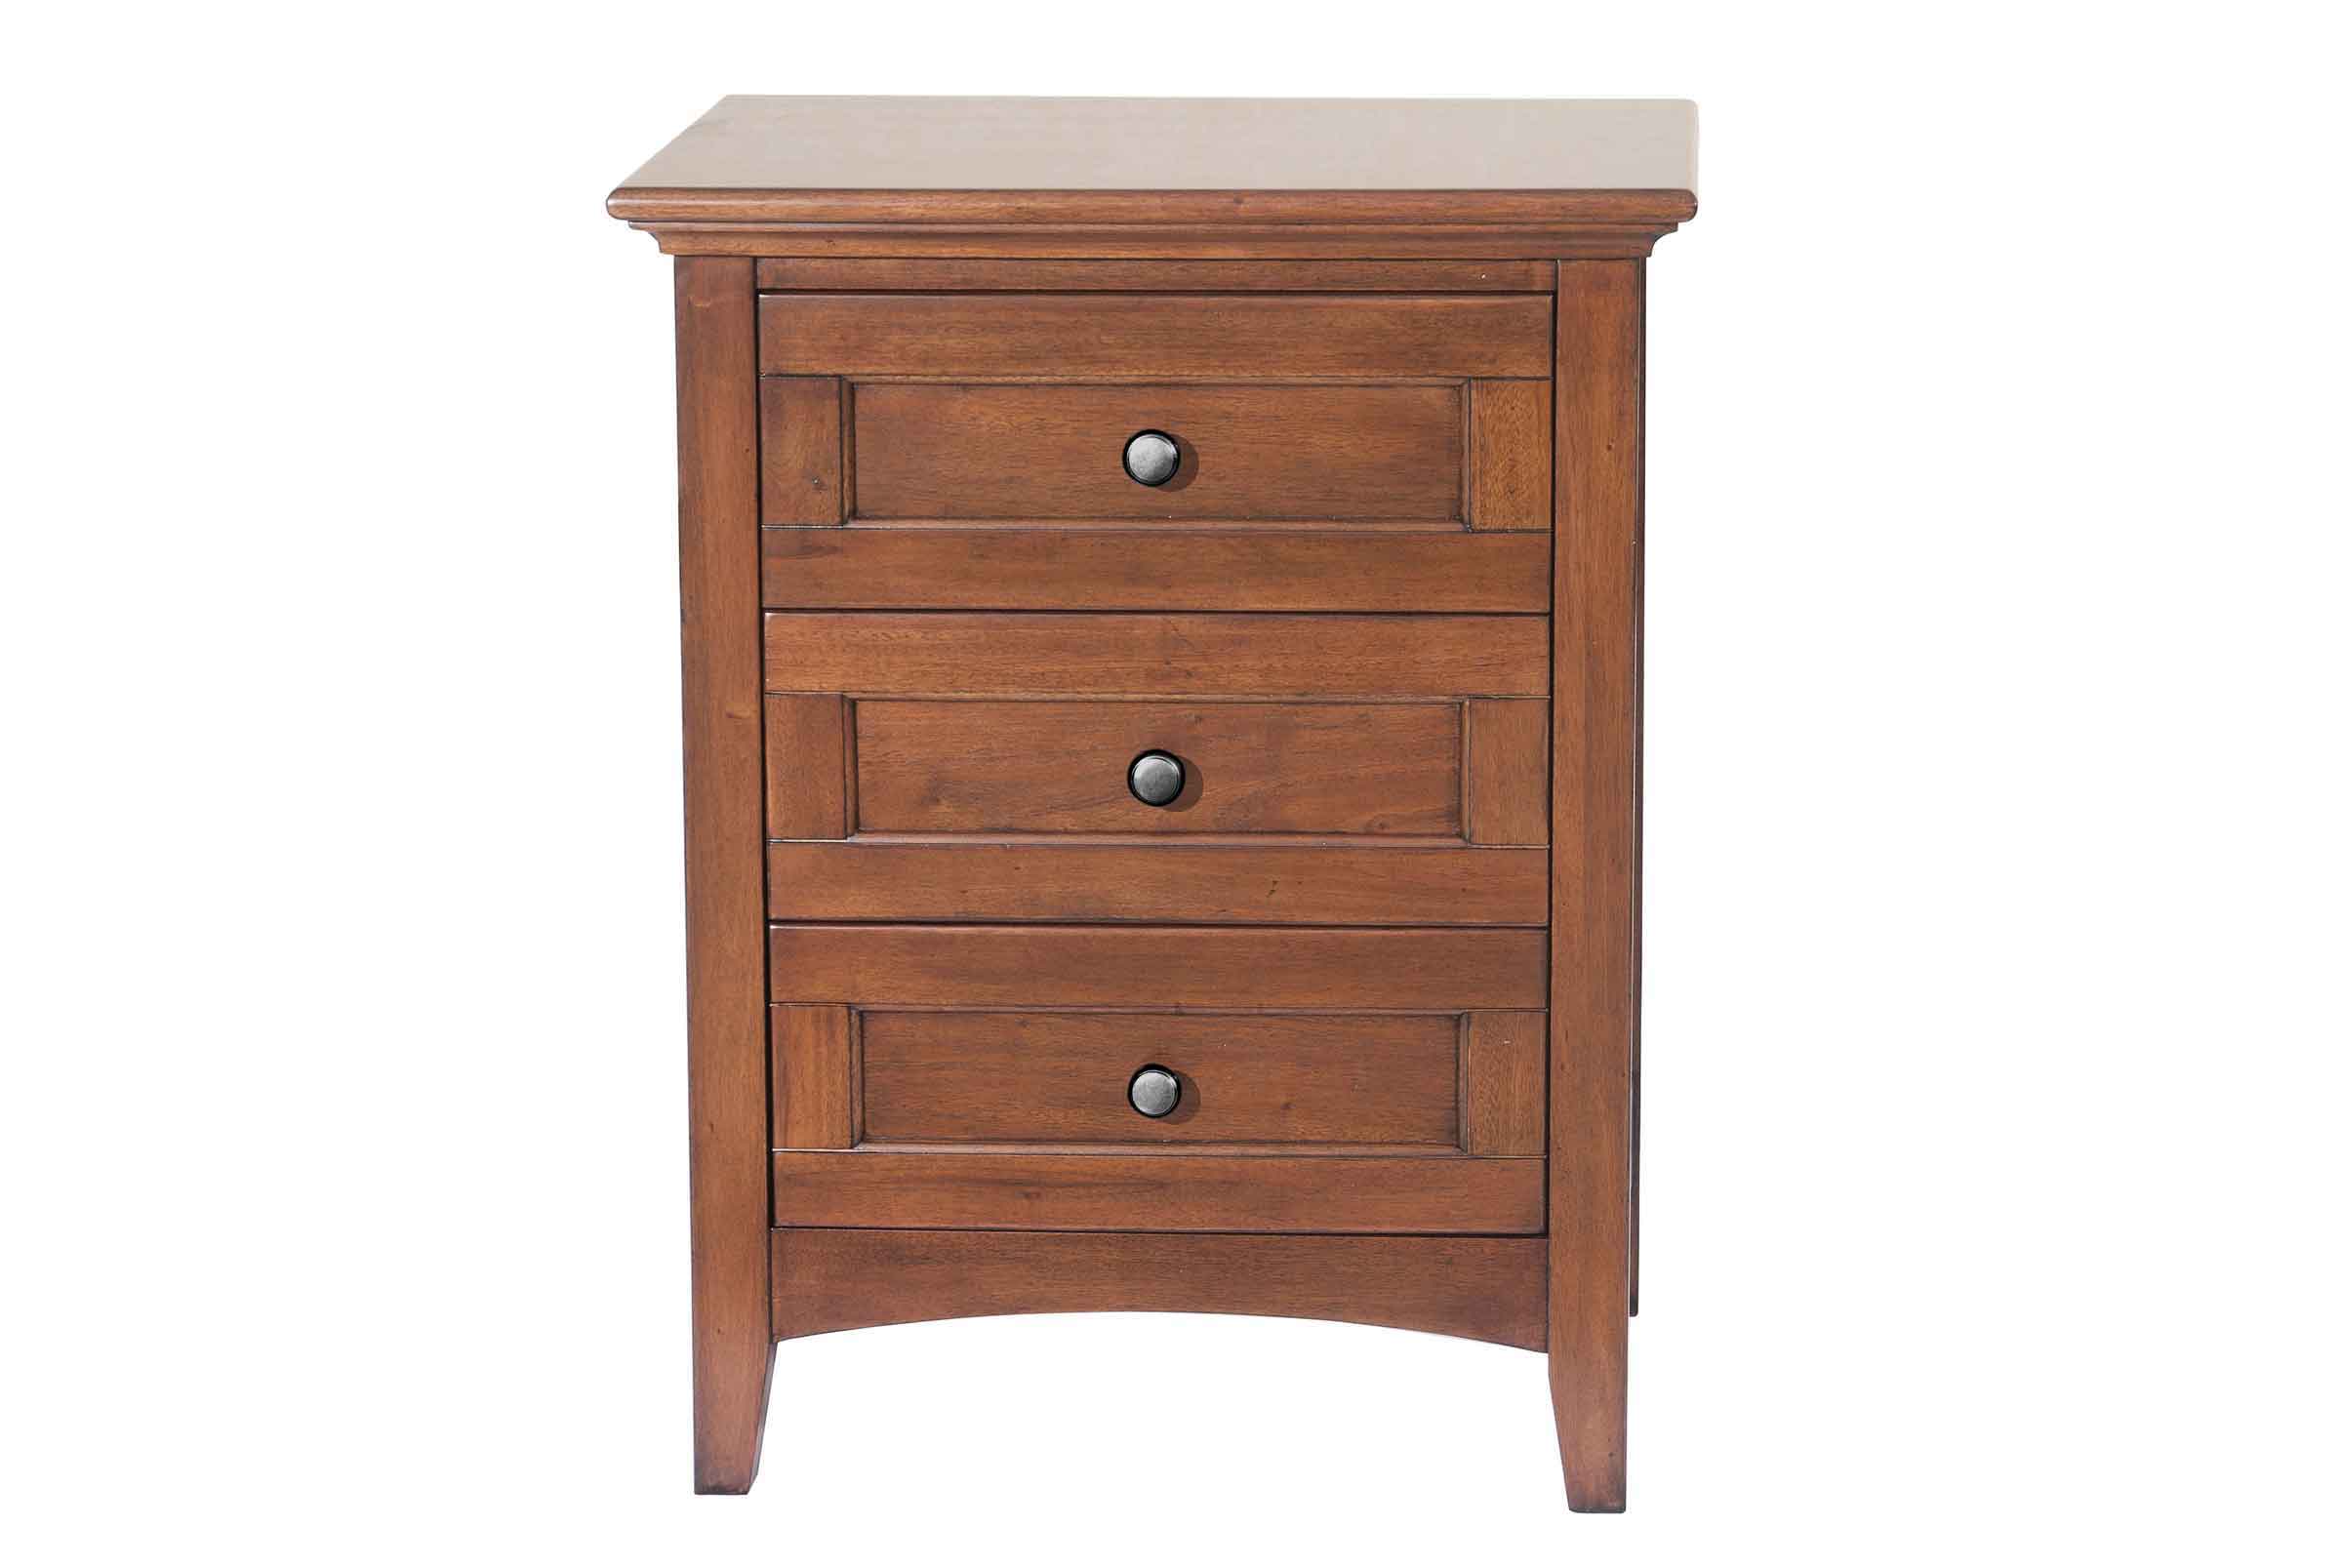 The Westlake Bedroom Furniture Collection Review